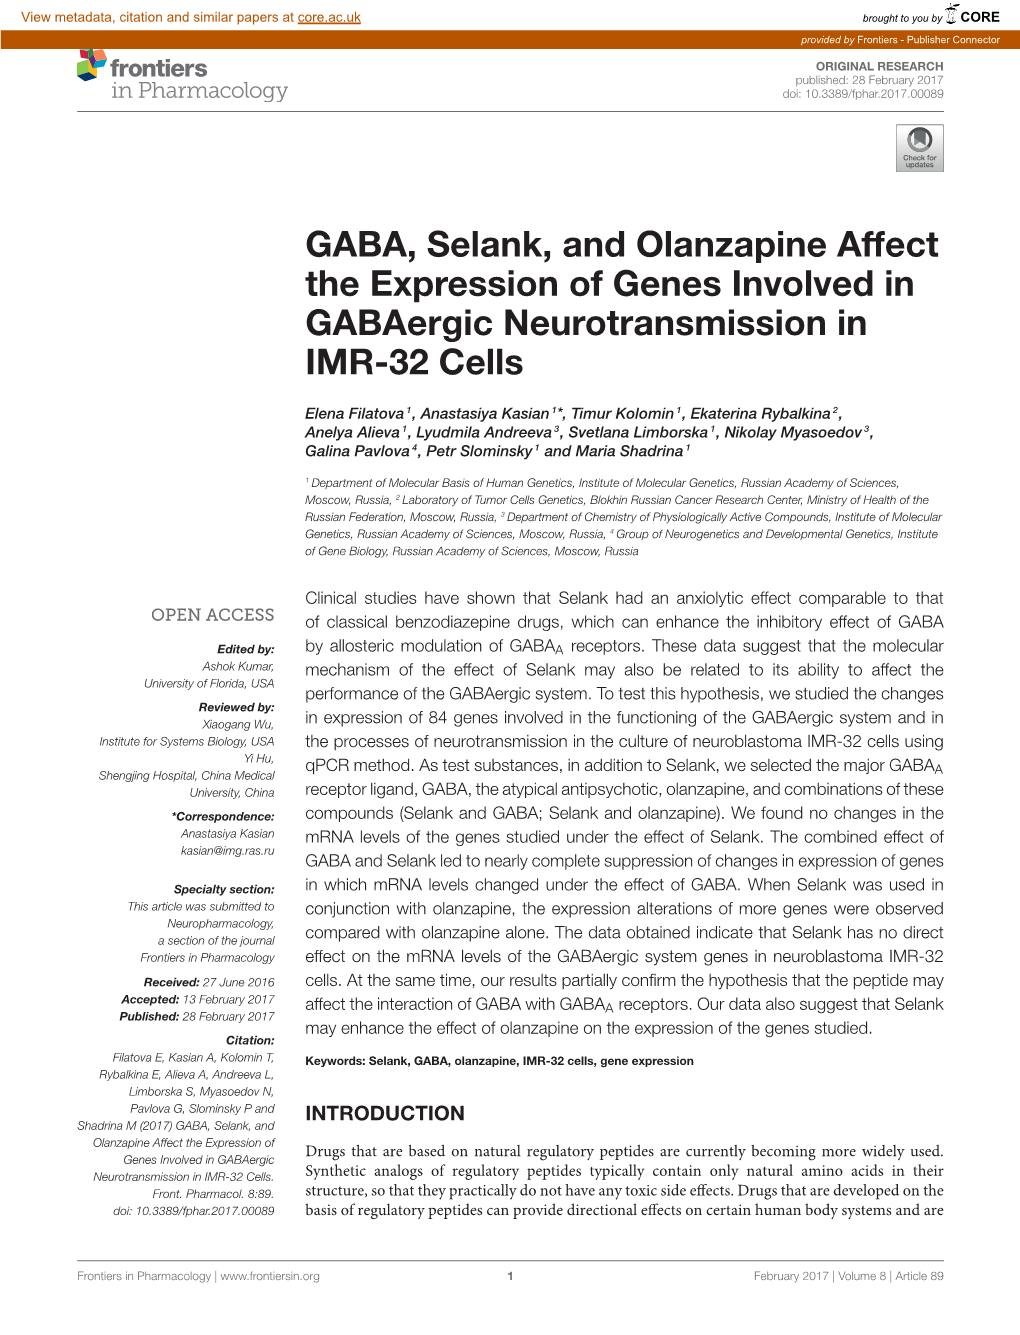 GABA, Selank, and Olanzapine Affect the Expression of Genes Involved in Gabaergic Neurotransmission in IMR-32 Cells